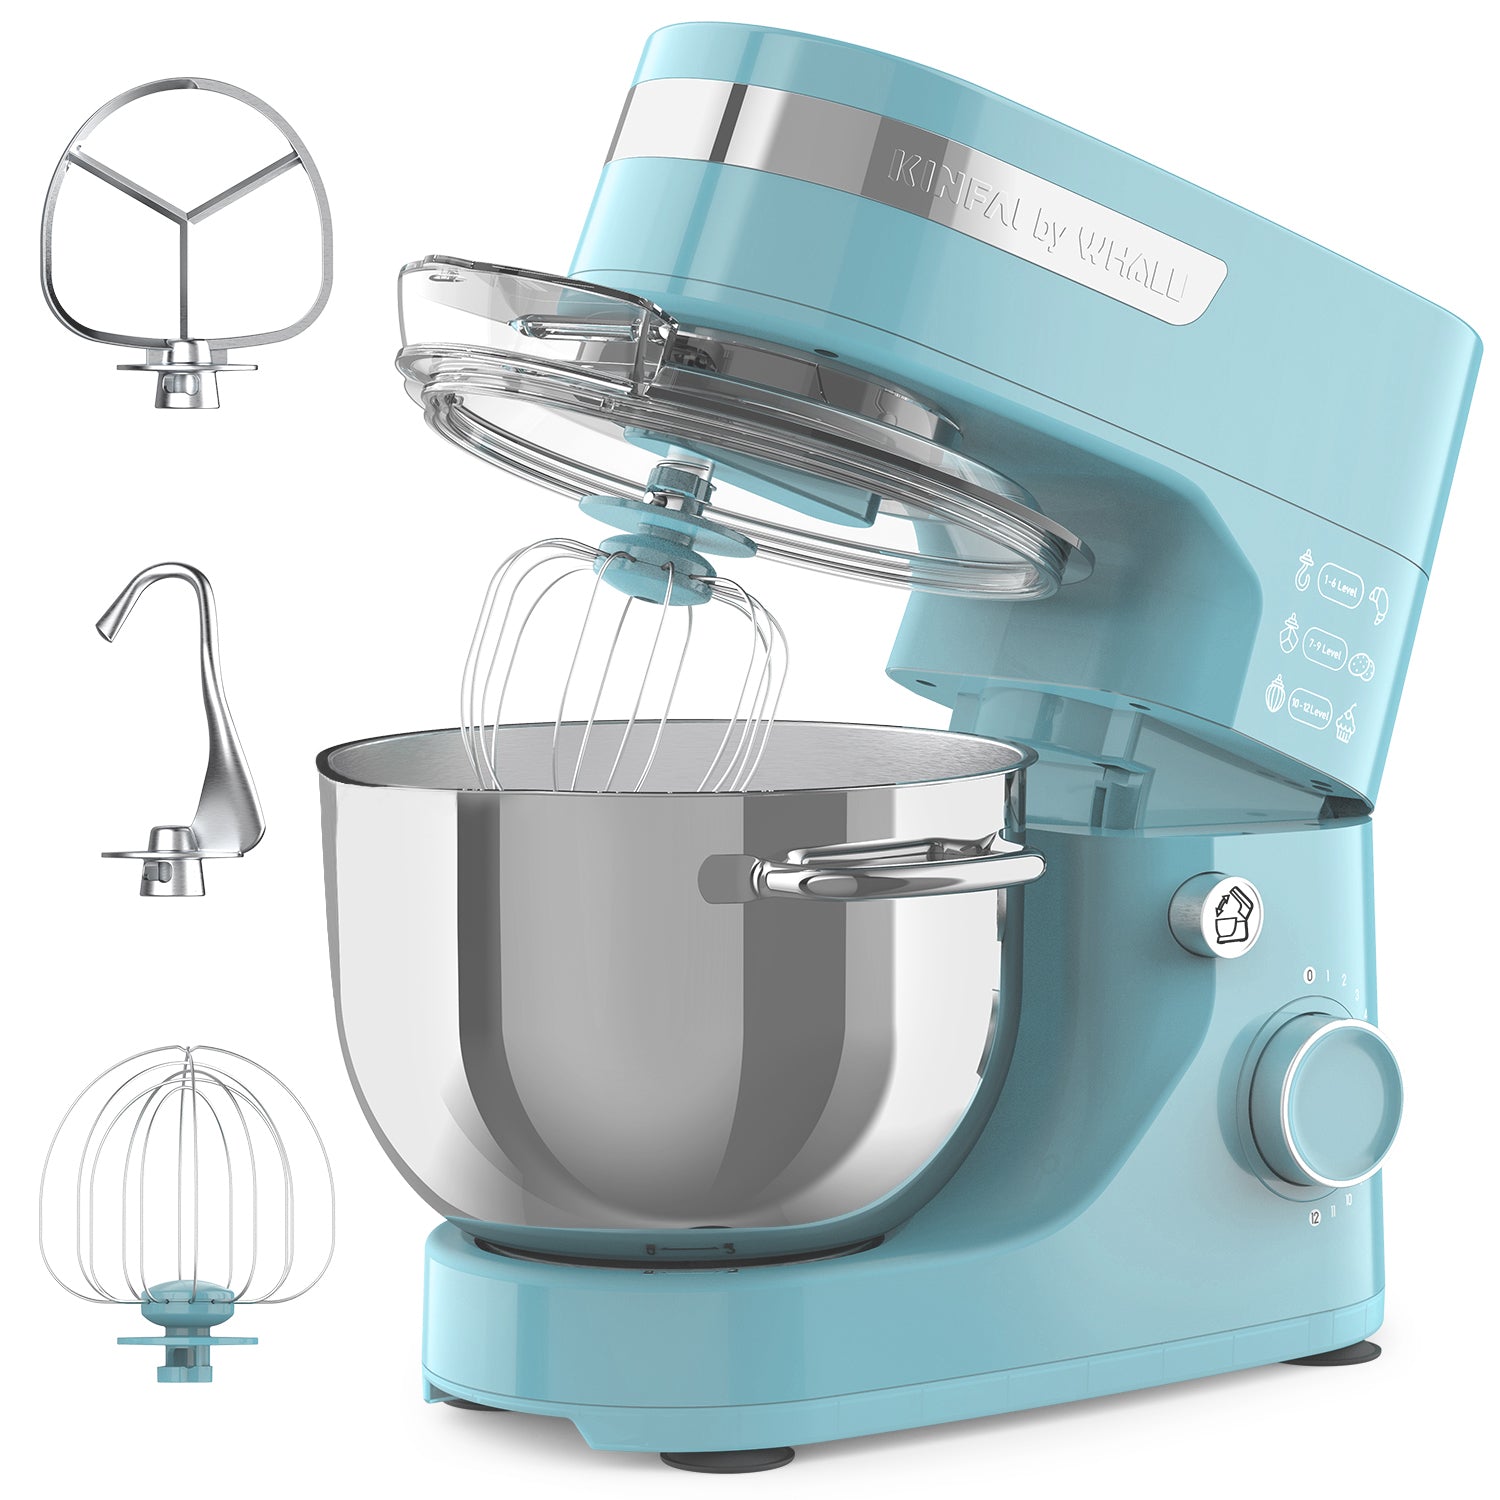 WHALL® Stand Mixer - 5.5Qt 12-Speed Tilt-Head Electric Kitchen Mixer with Dough Hook/Wire Whip/Beater, Stainless Steel Bowl (blue)